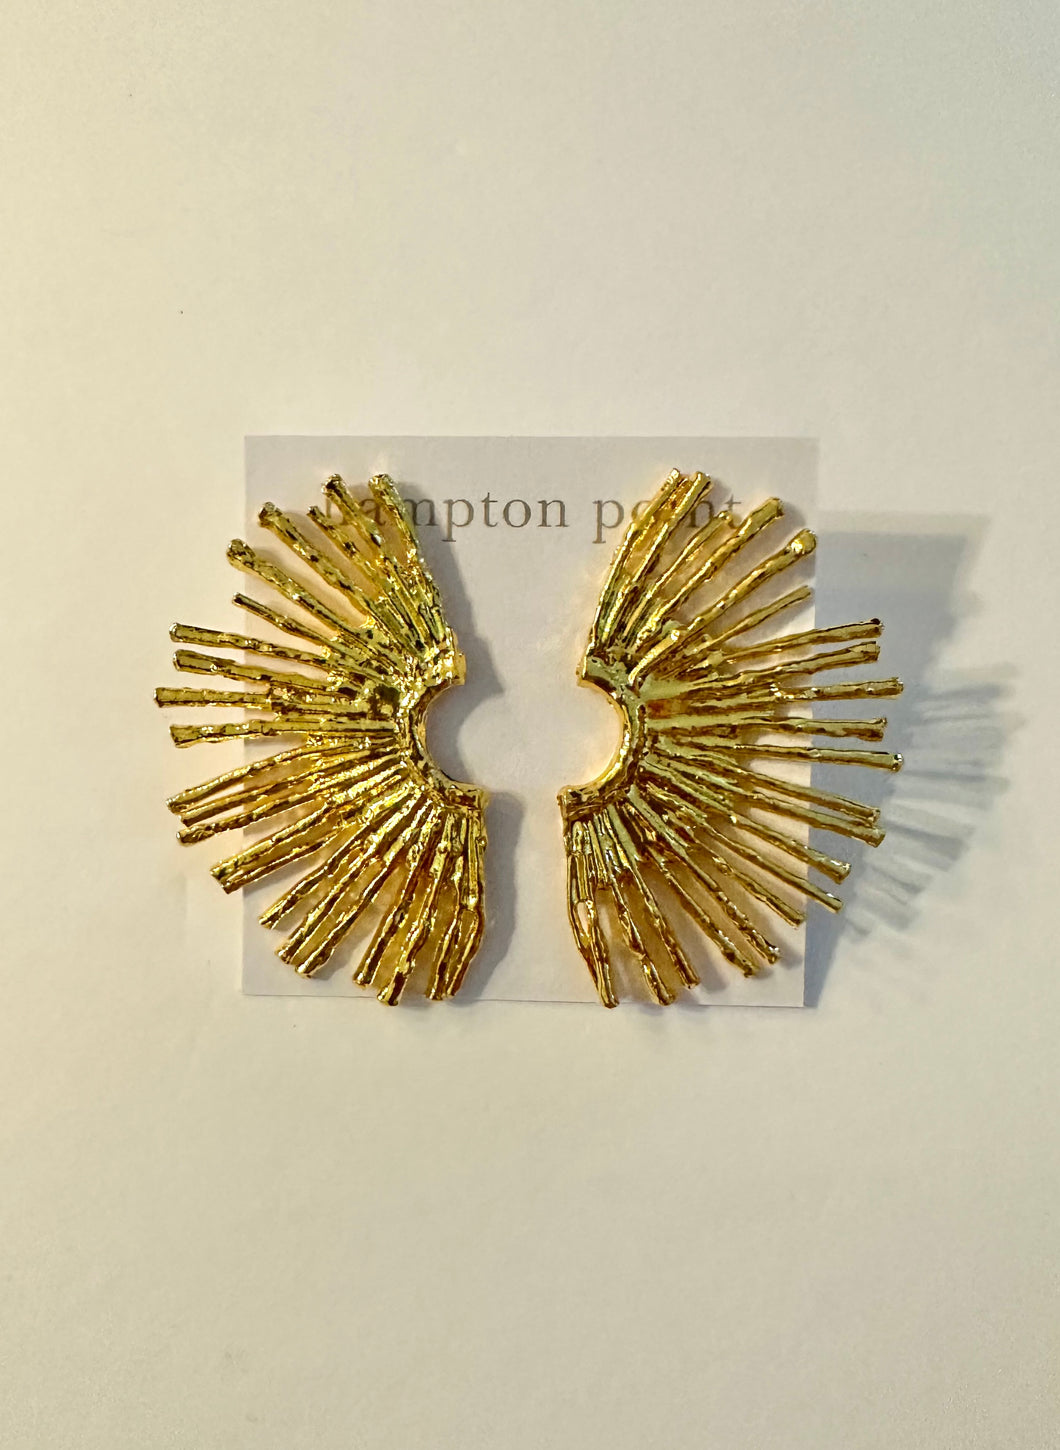 Gold burst earrings. Light weight. About 2 inches.